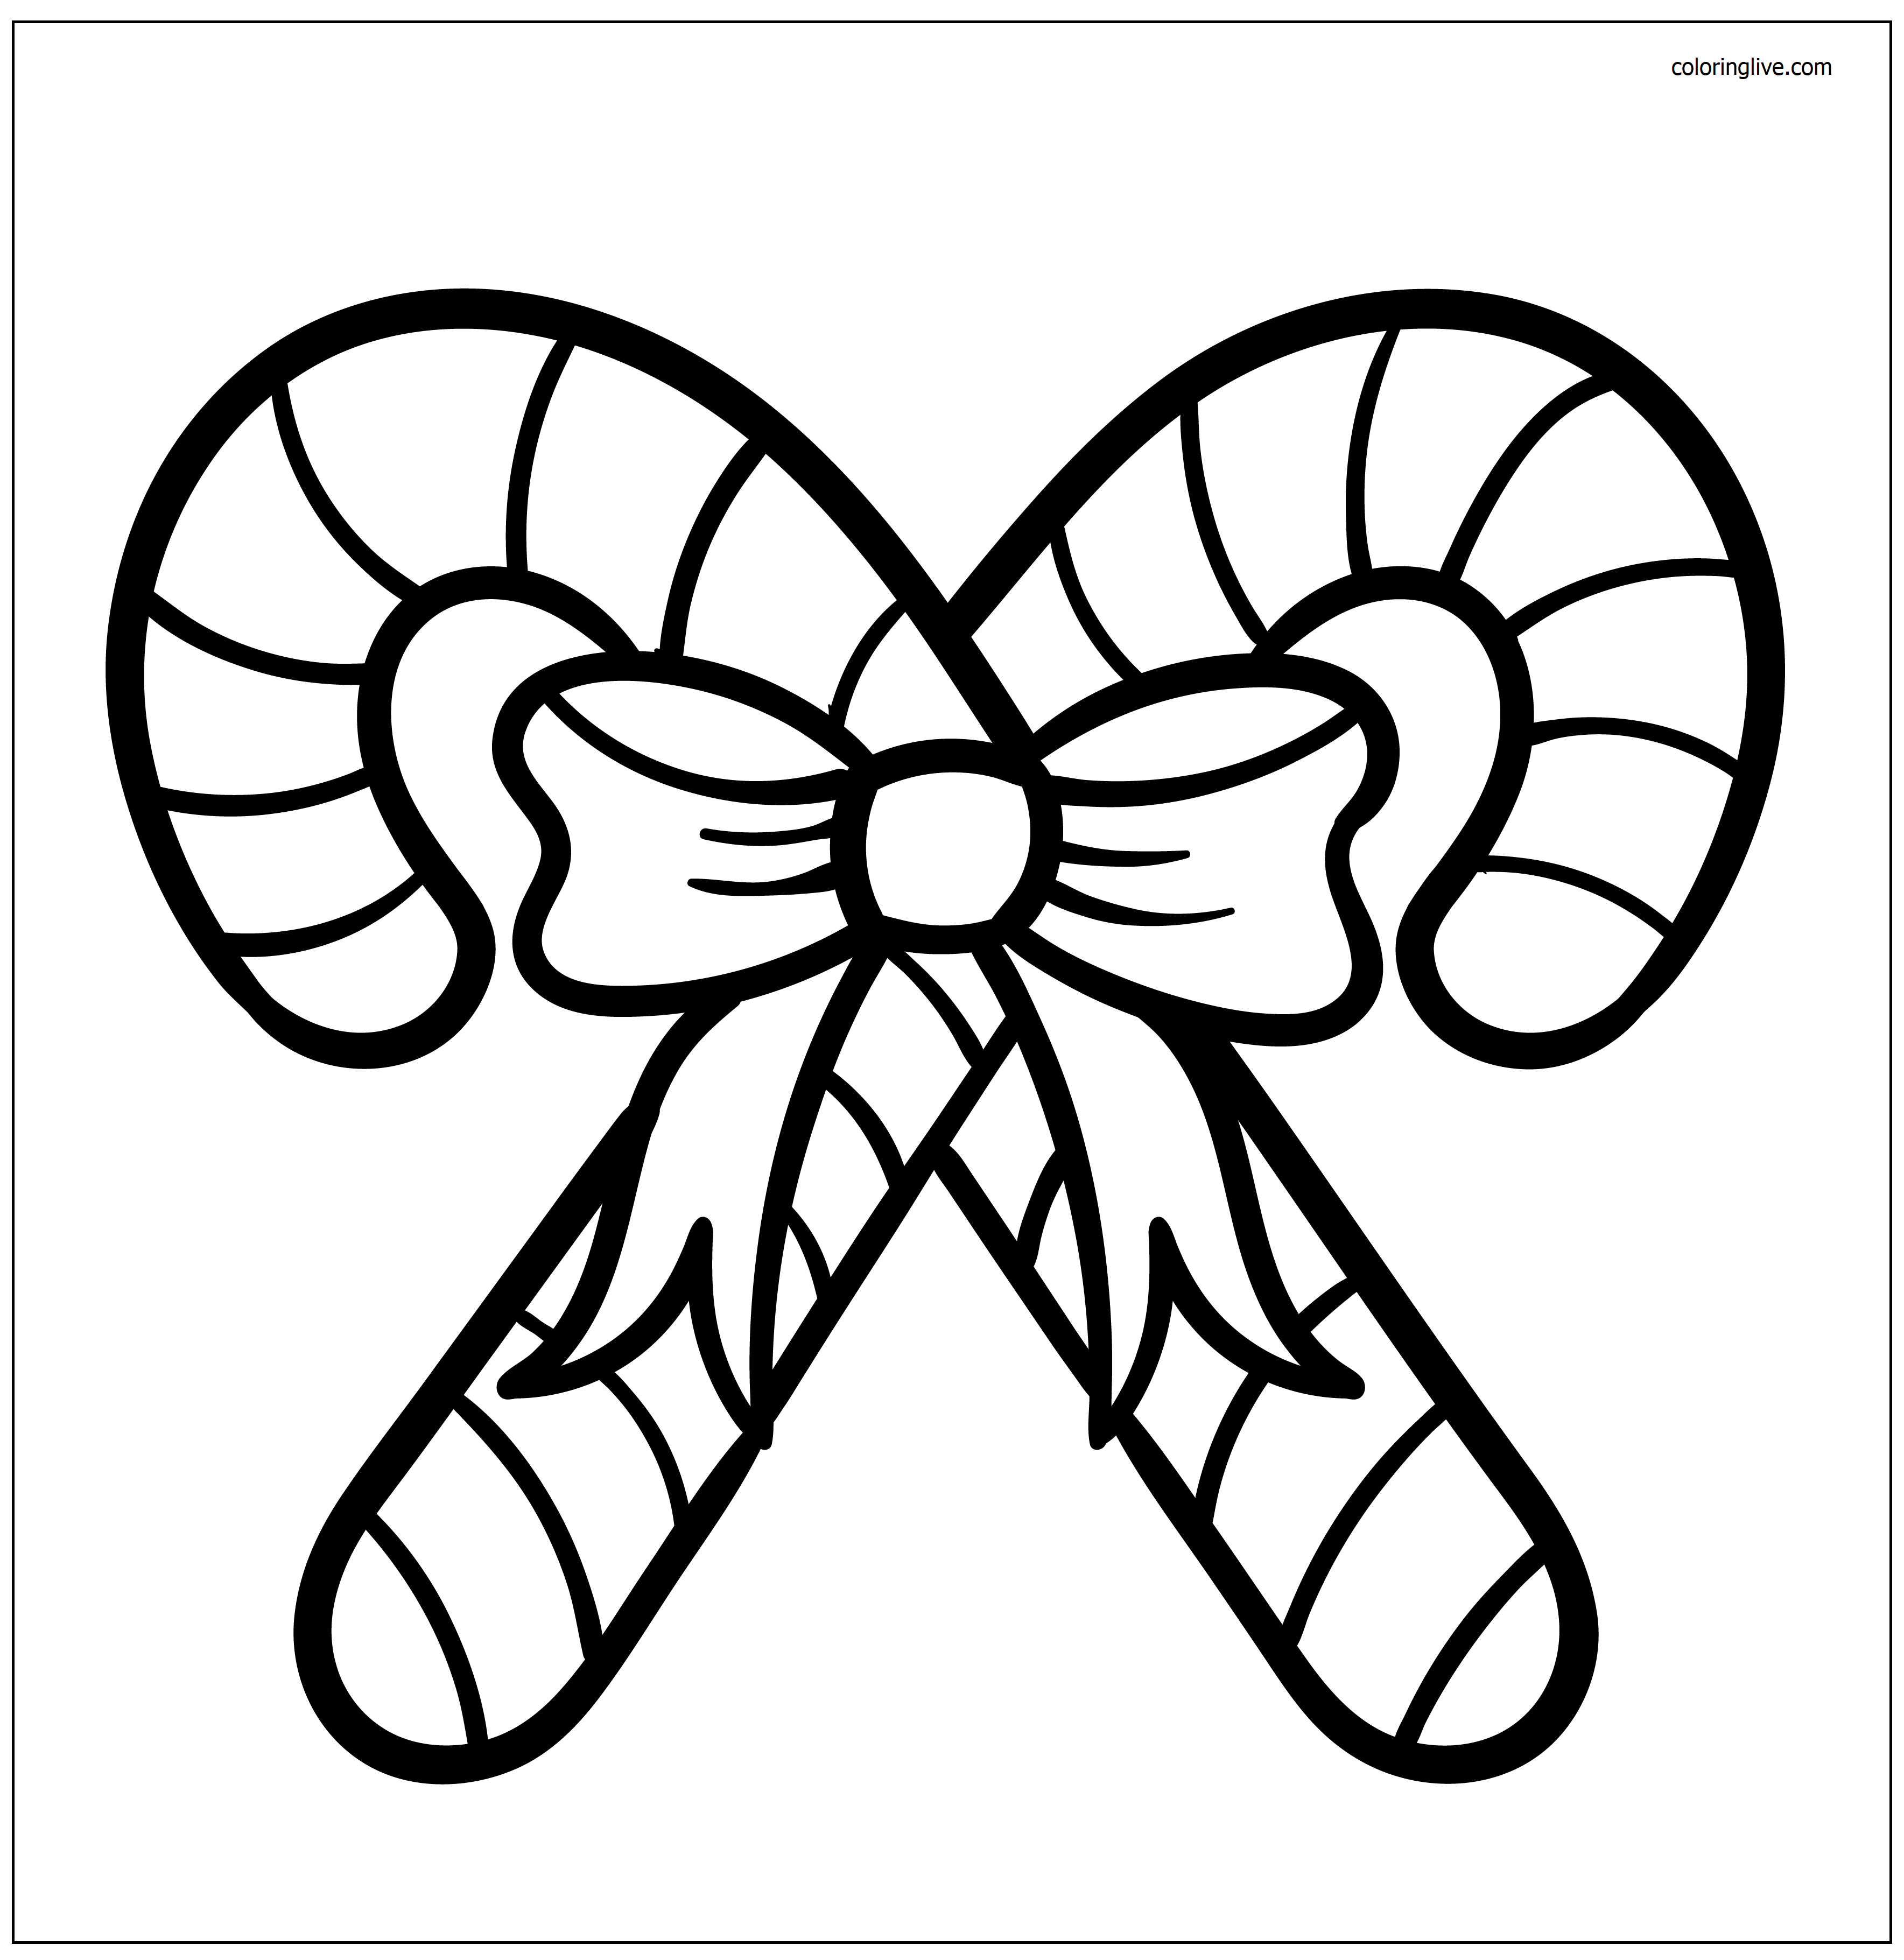 Printable Cande Cane to color Coloring Page for kids.